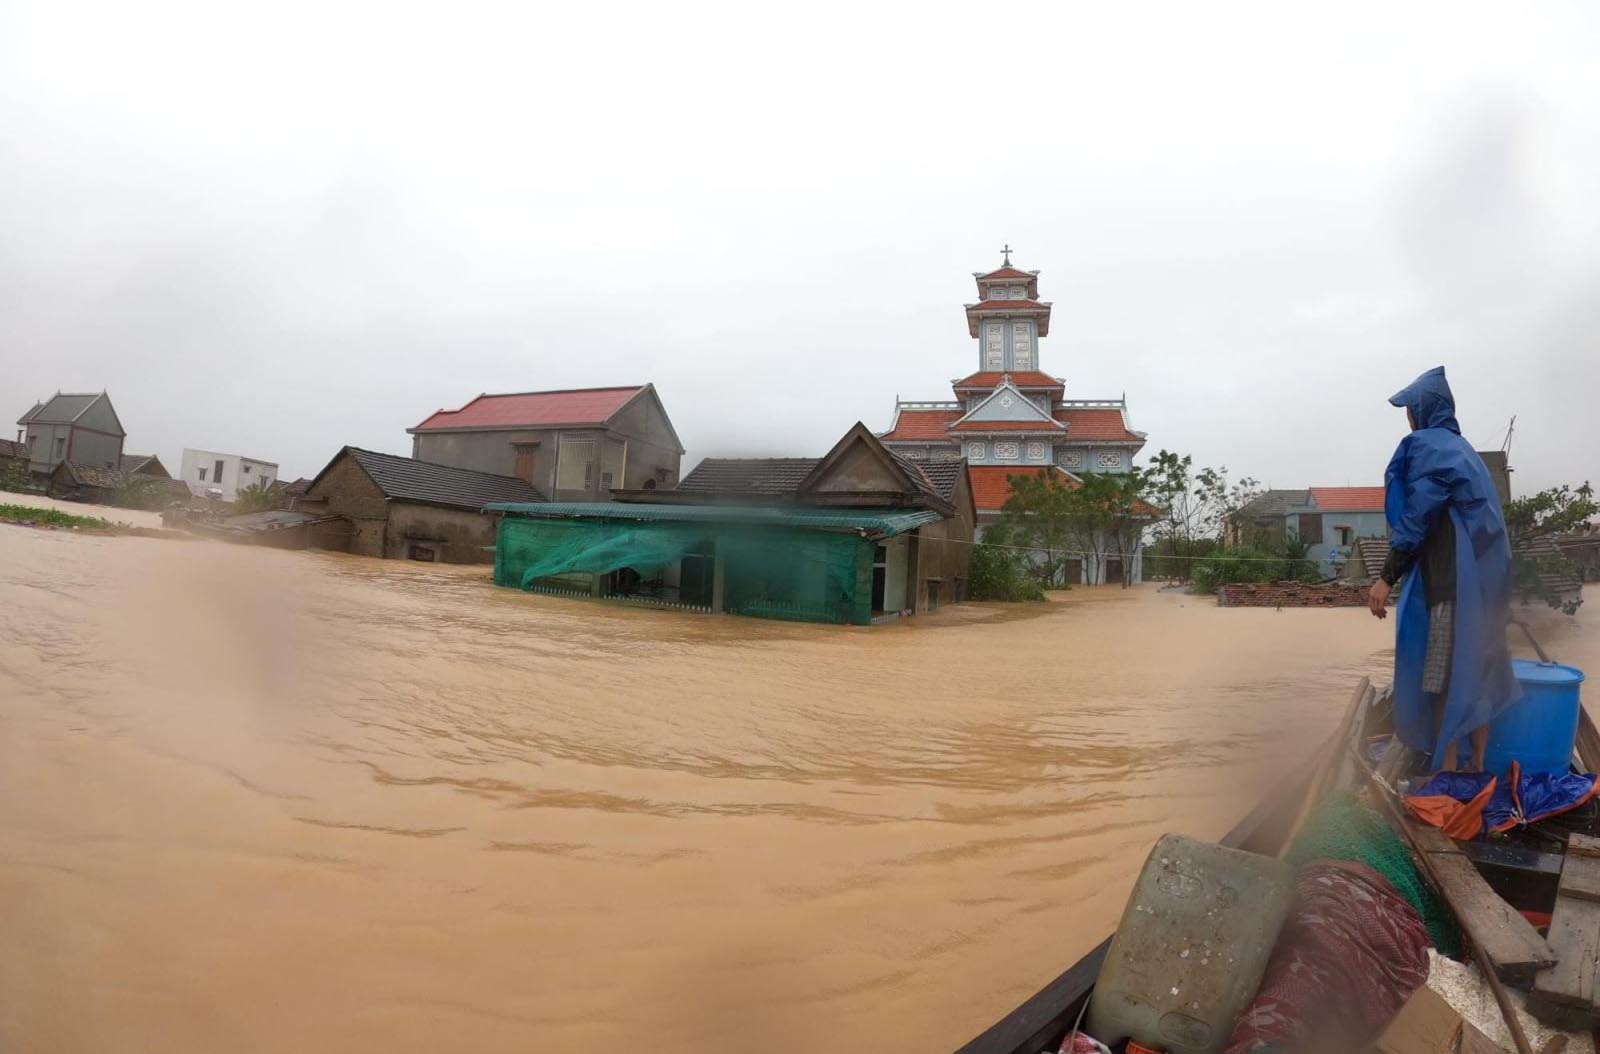 The List of Contributions for victims of the flooding in Central Vietnam received by Caritas Vietnam from January to June 2021